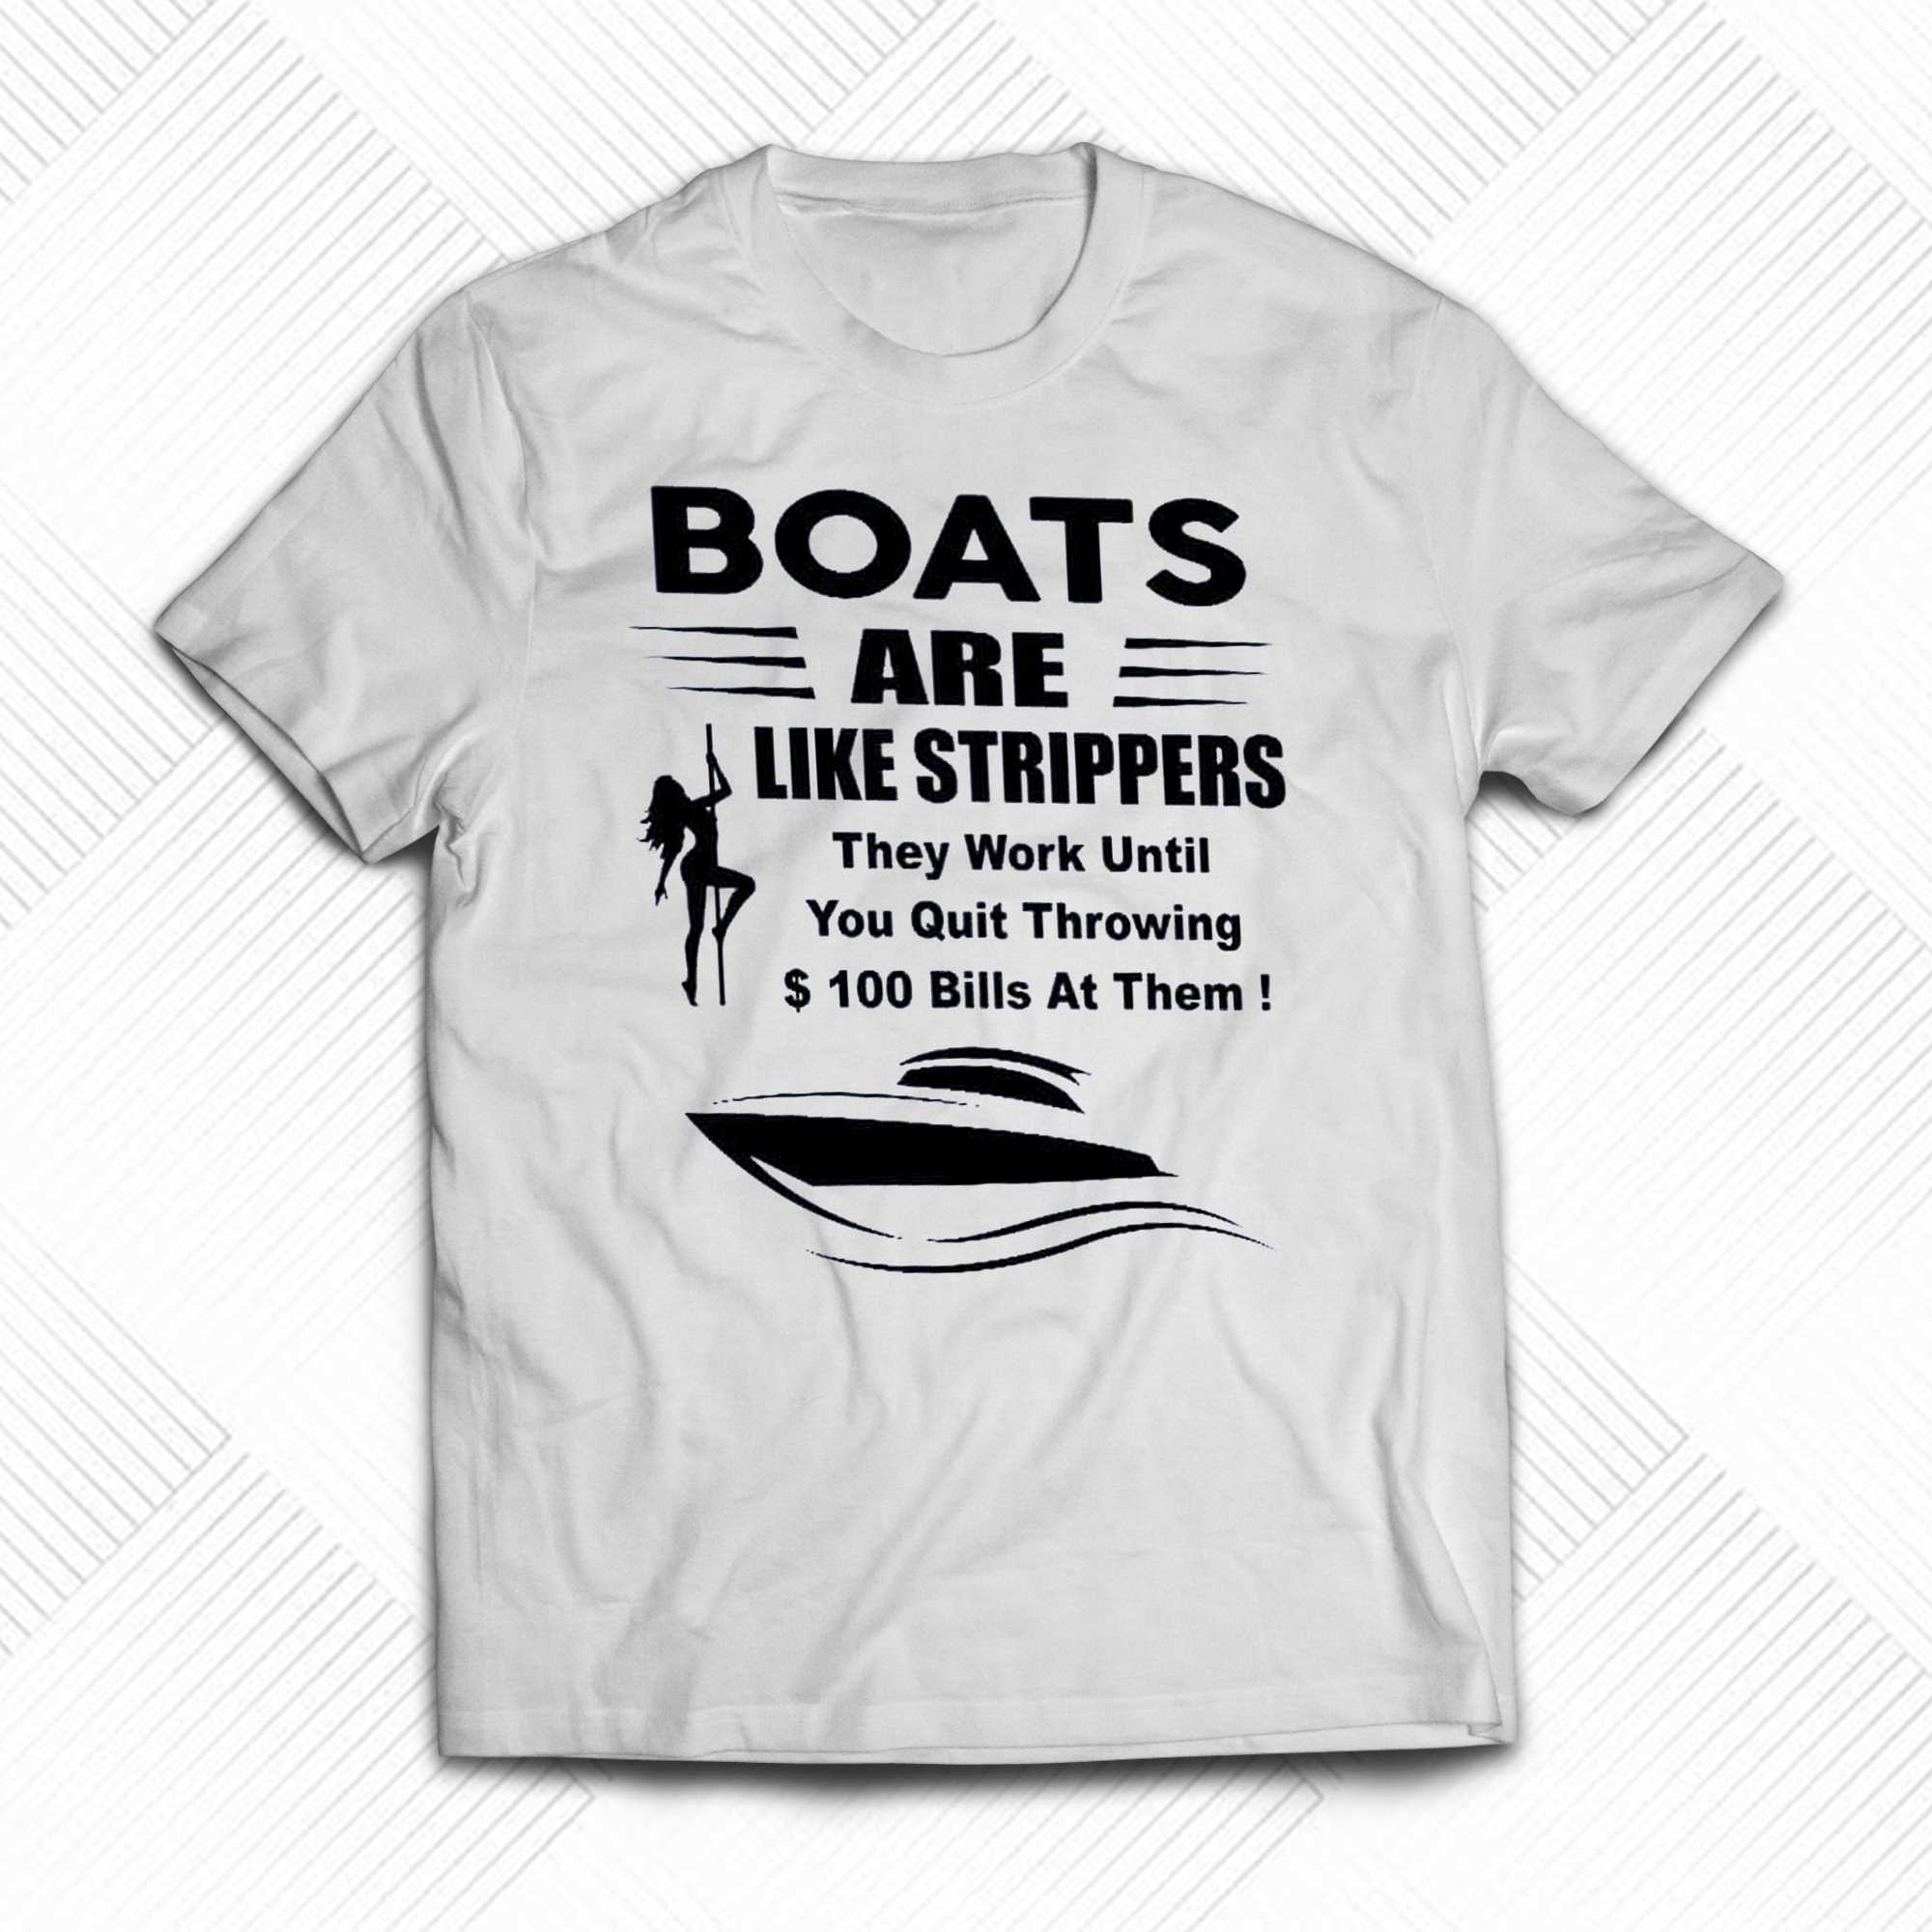 Boats Are Live Strippers They Work Until You Quit Throwing 100$ Bills At Them T-shirt